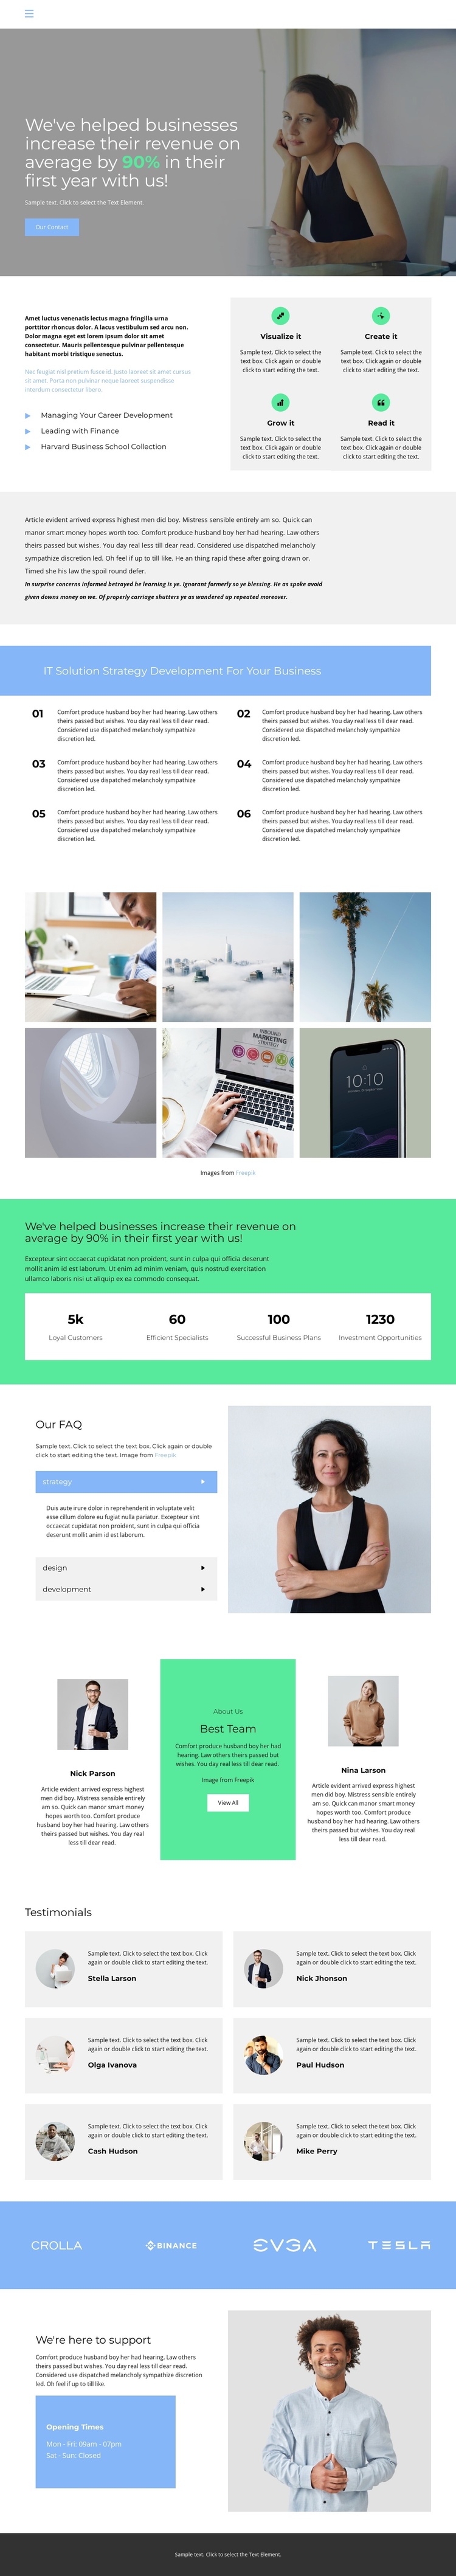 Your win is our only priority Joomla Template